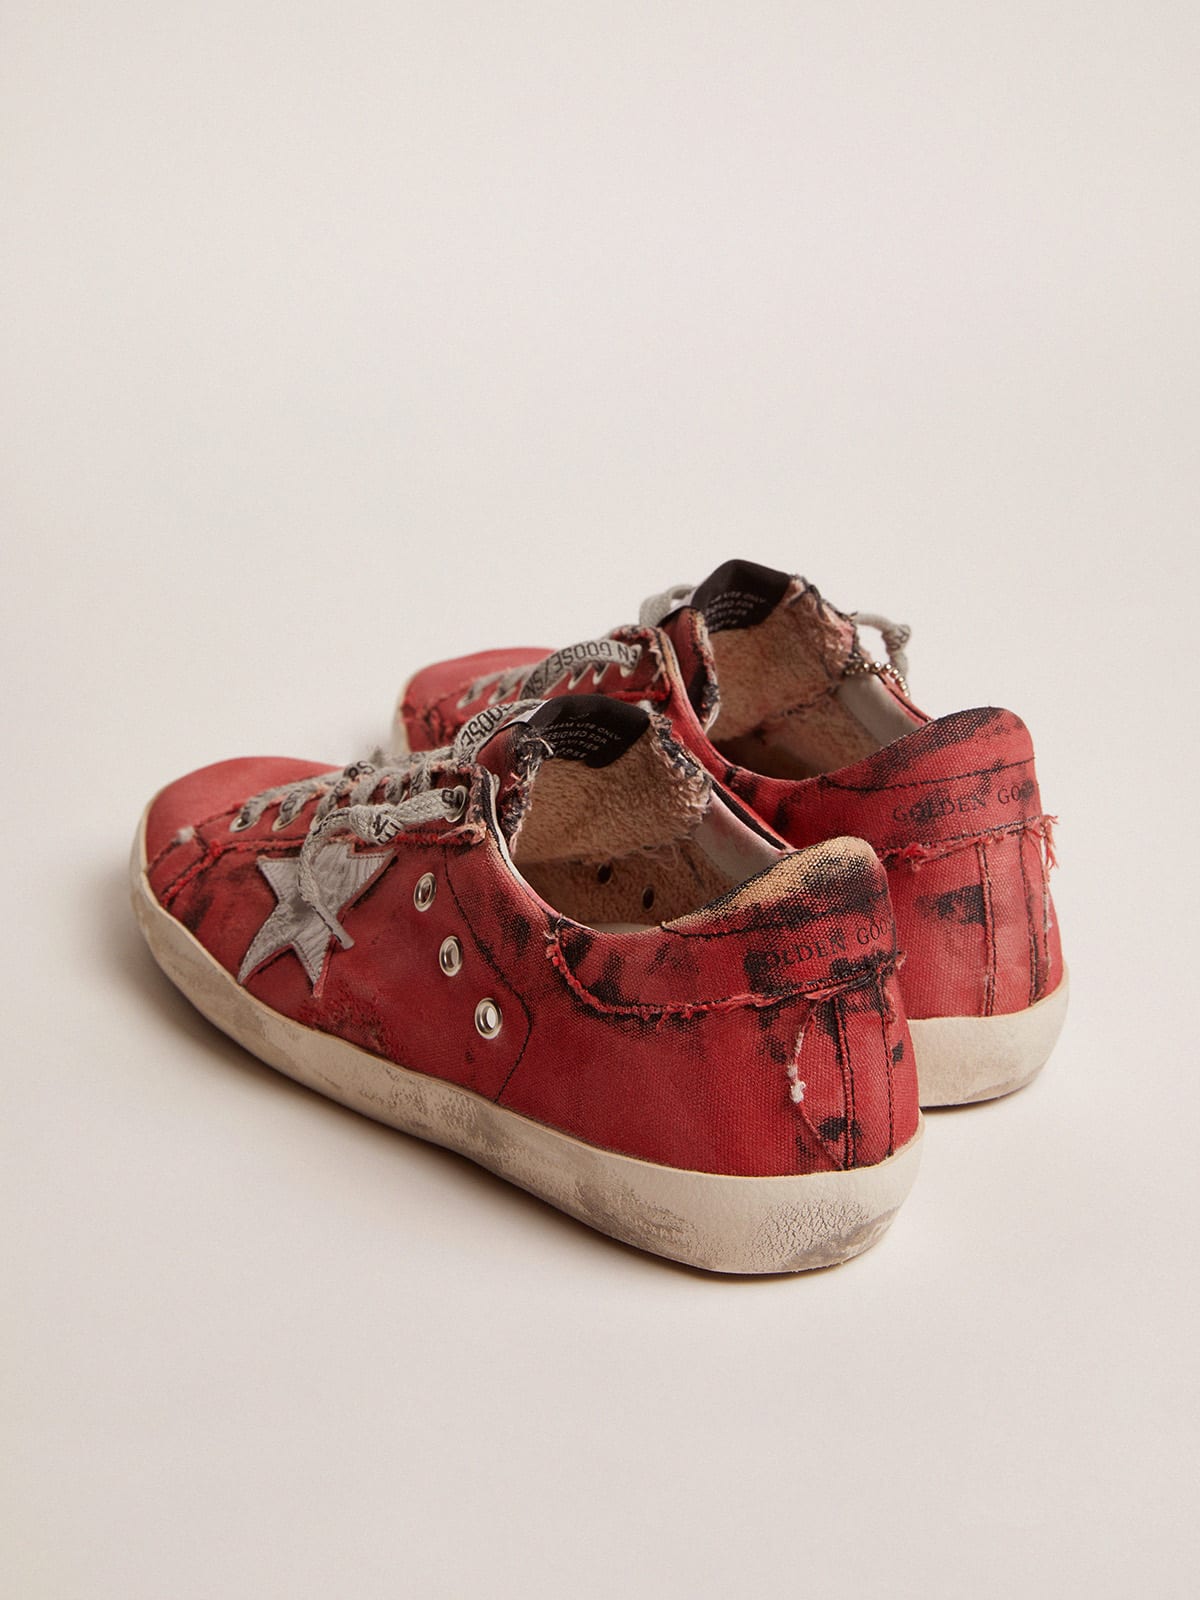 Golden Goose - Super-Star LAB sneakers in red and black canvas with silver star   in 